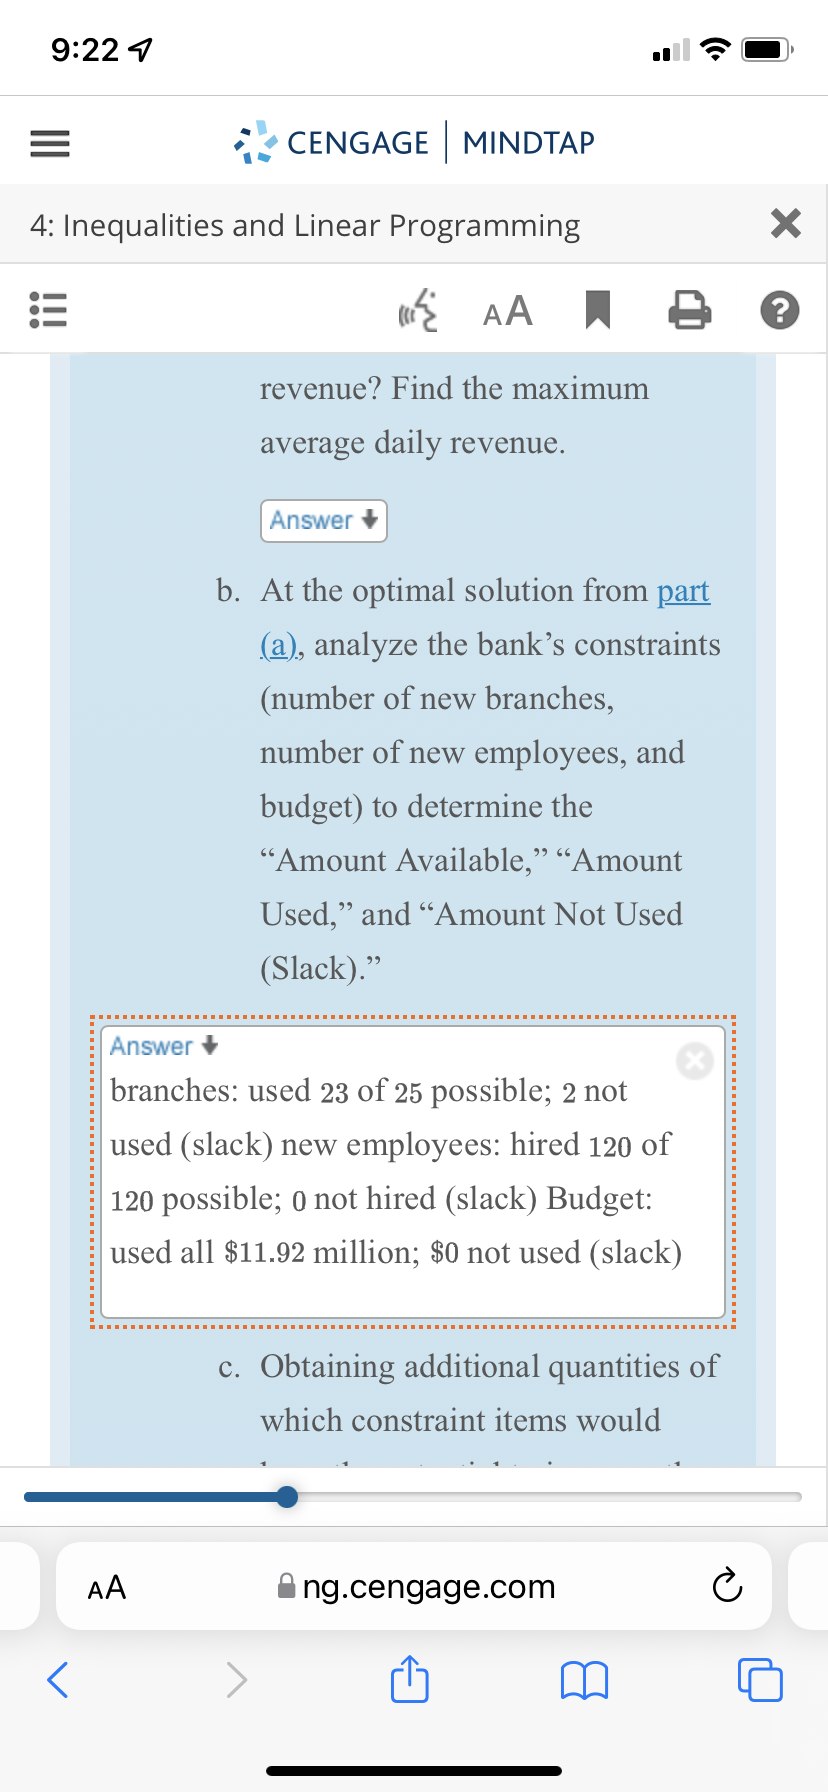 9:22 1
CENGAGE MINDTAP
4: Inequalities and Linear Programming
revenue? Find the maximum
average daily revenue.
Answer +
b. At the optimal solution from part
(a), analyze the bank’s constraints
(number of new branches,
number of new employees, and
budget) to determine the
"Amount Available," “Amount
Used," and "Amount Not Used
(Slack)."
Answer +
branches: used 23 of 25 possible; 2 not
used (slack) new employees: hired 120 of
120 possible; 0 not hired (slack) Budget:
used all $11.92 million; $0 not used (slack)
c. Obtaining additional quantities of
which constraint items would
AA
ng.cengage.com
